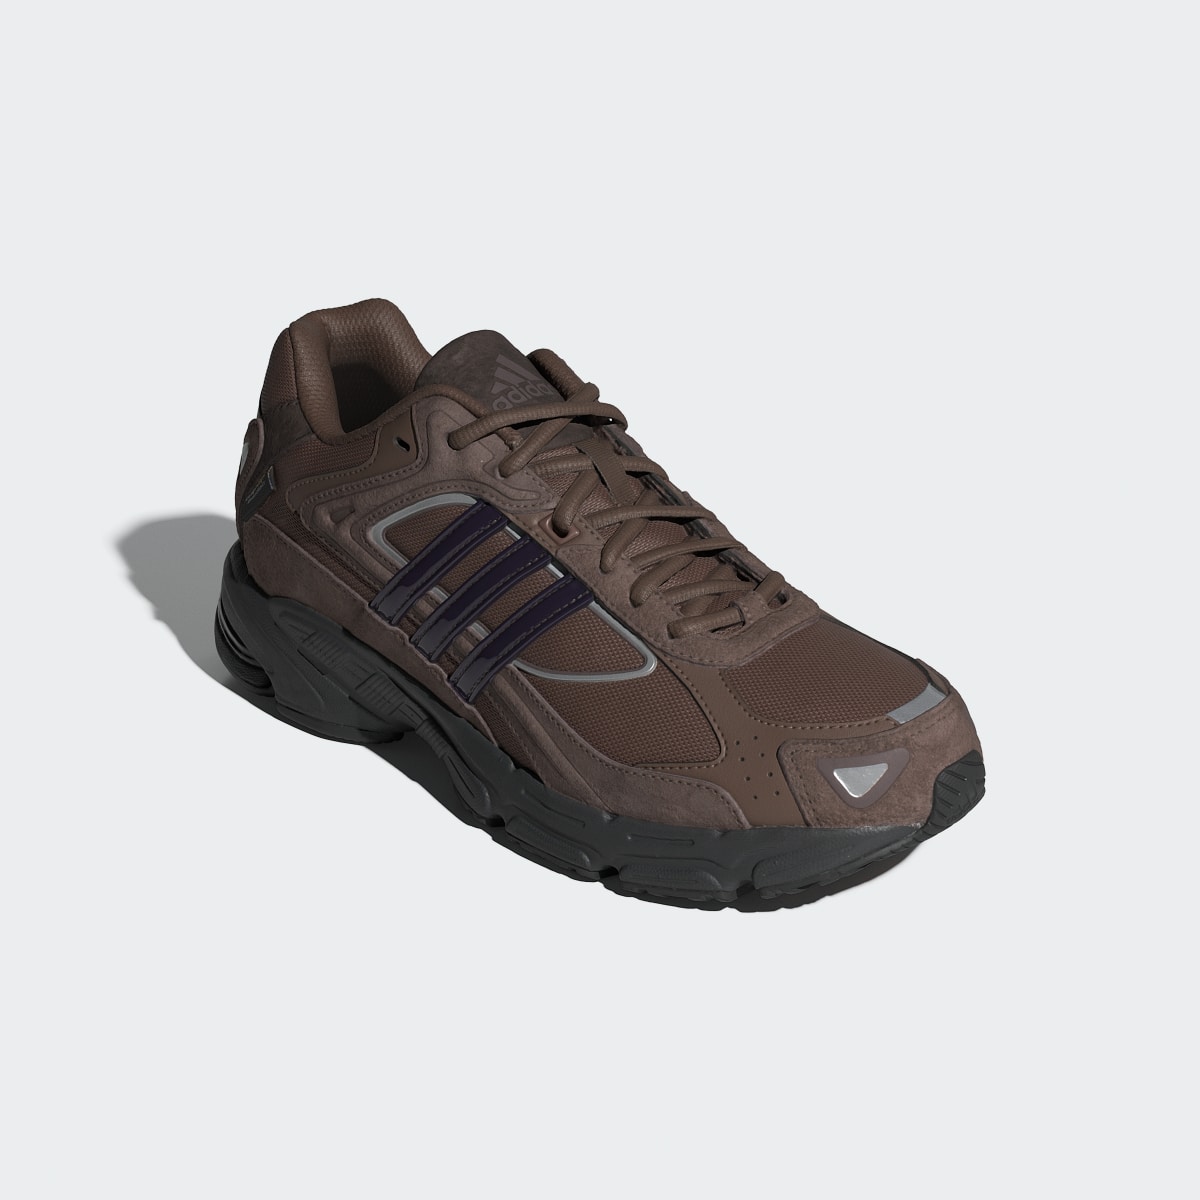 Adidas Chaussure Response CL. 5